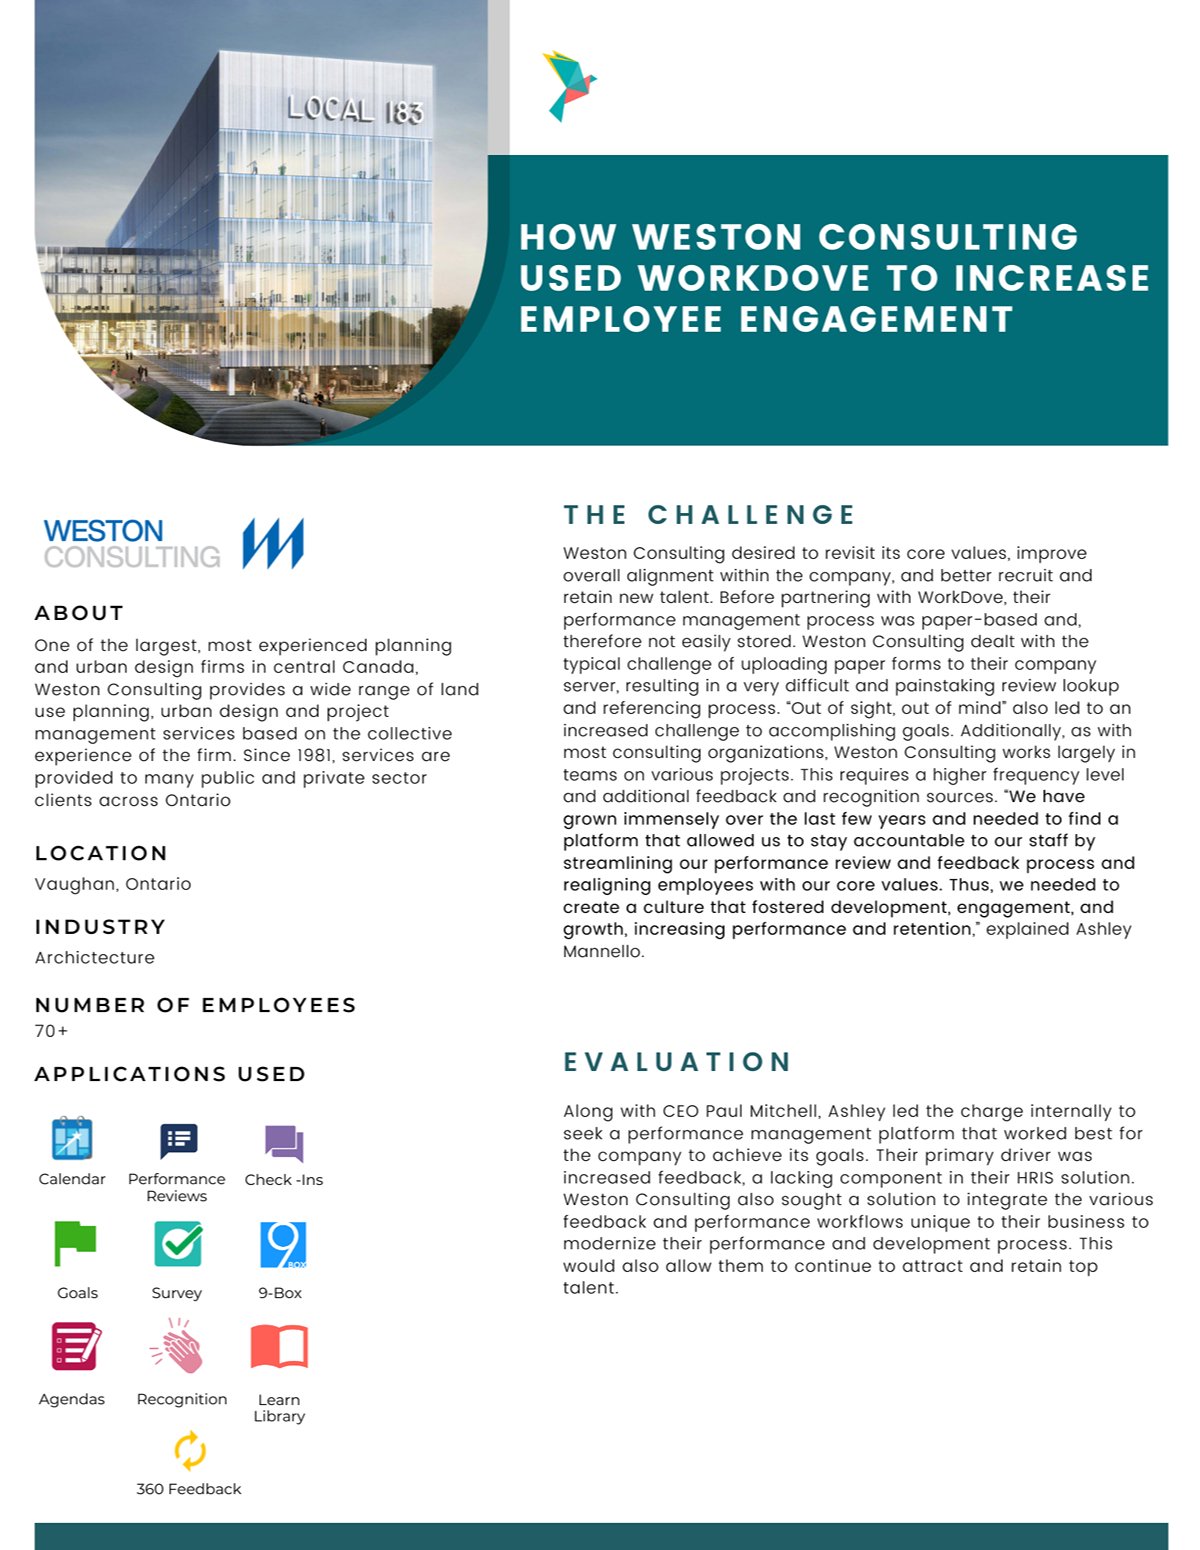 How Weston Consulting Used WorkDove To Increase Employee Engagement